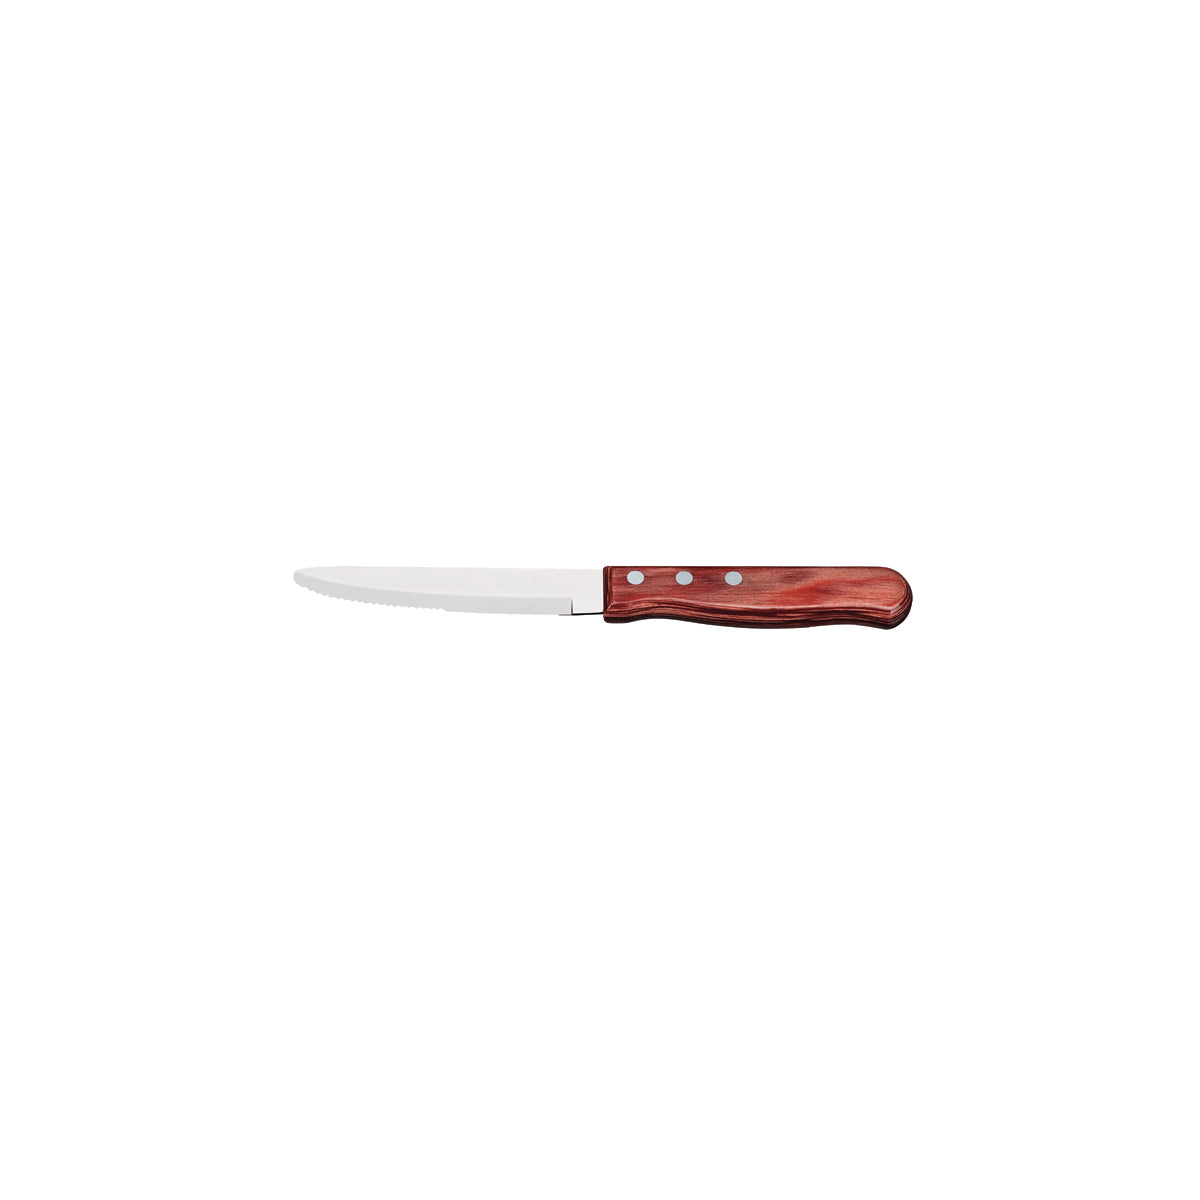 TM38299/004 Tramontina Churrasco Steak Knife Serrated Wide Blade with Polywood Handle Red 127mm With Reverse Logo Tomkin Australia Hospitality Supplies